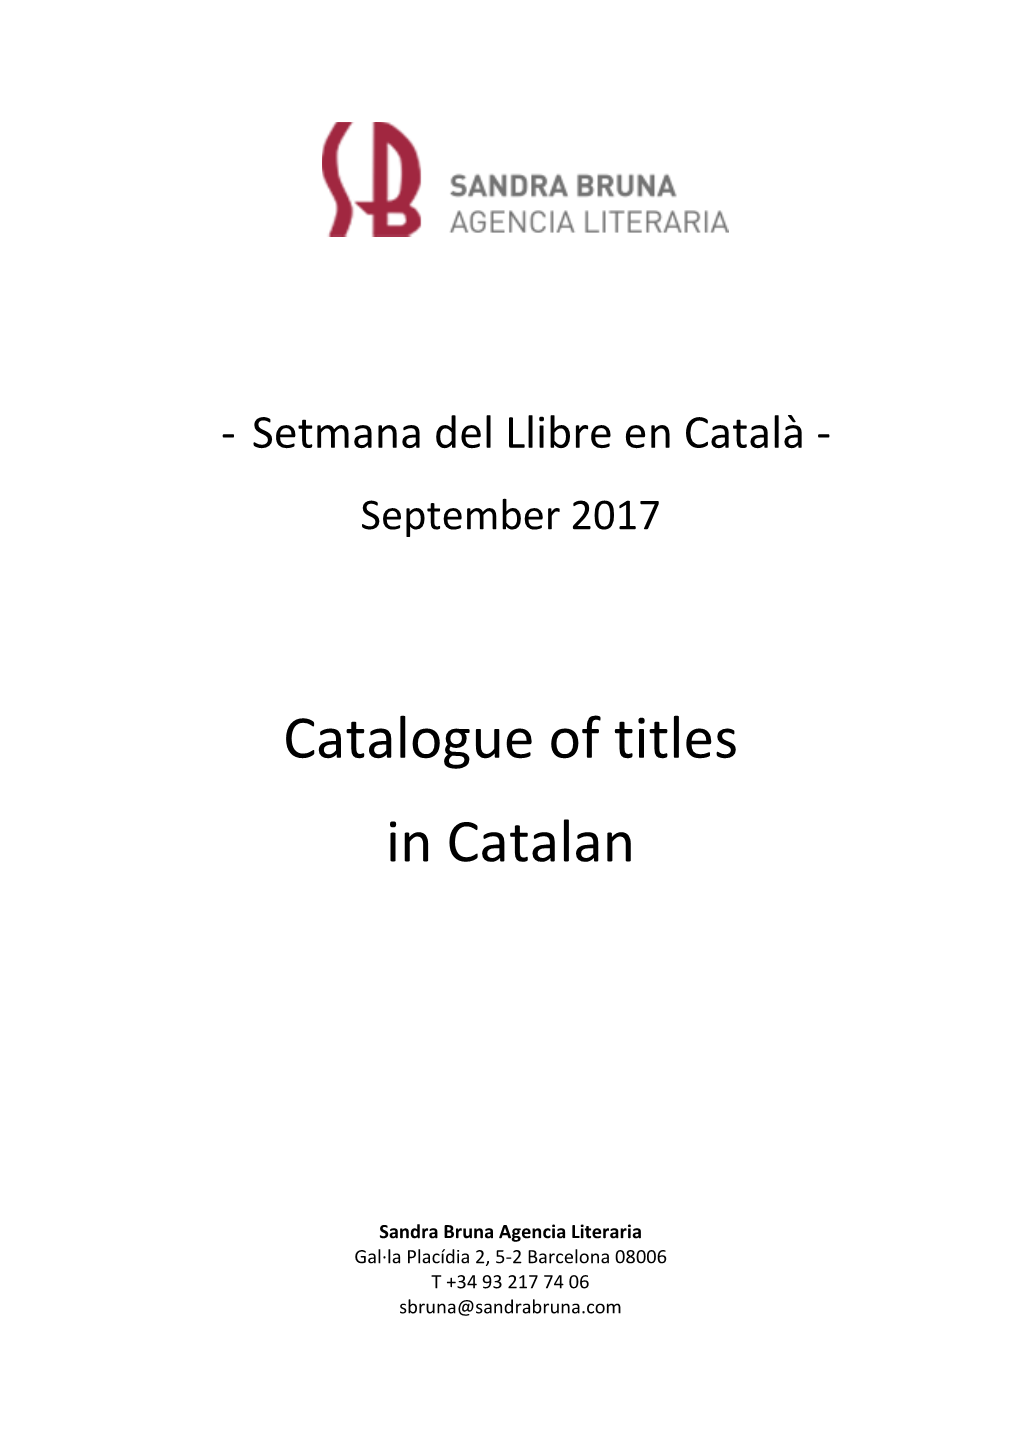 Catalogue of Titles in Catalan